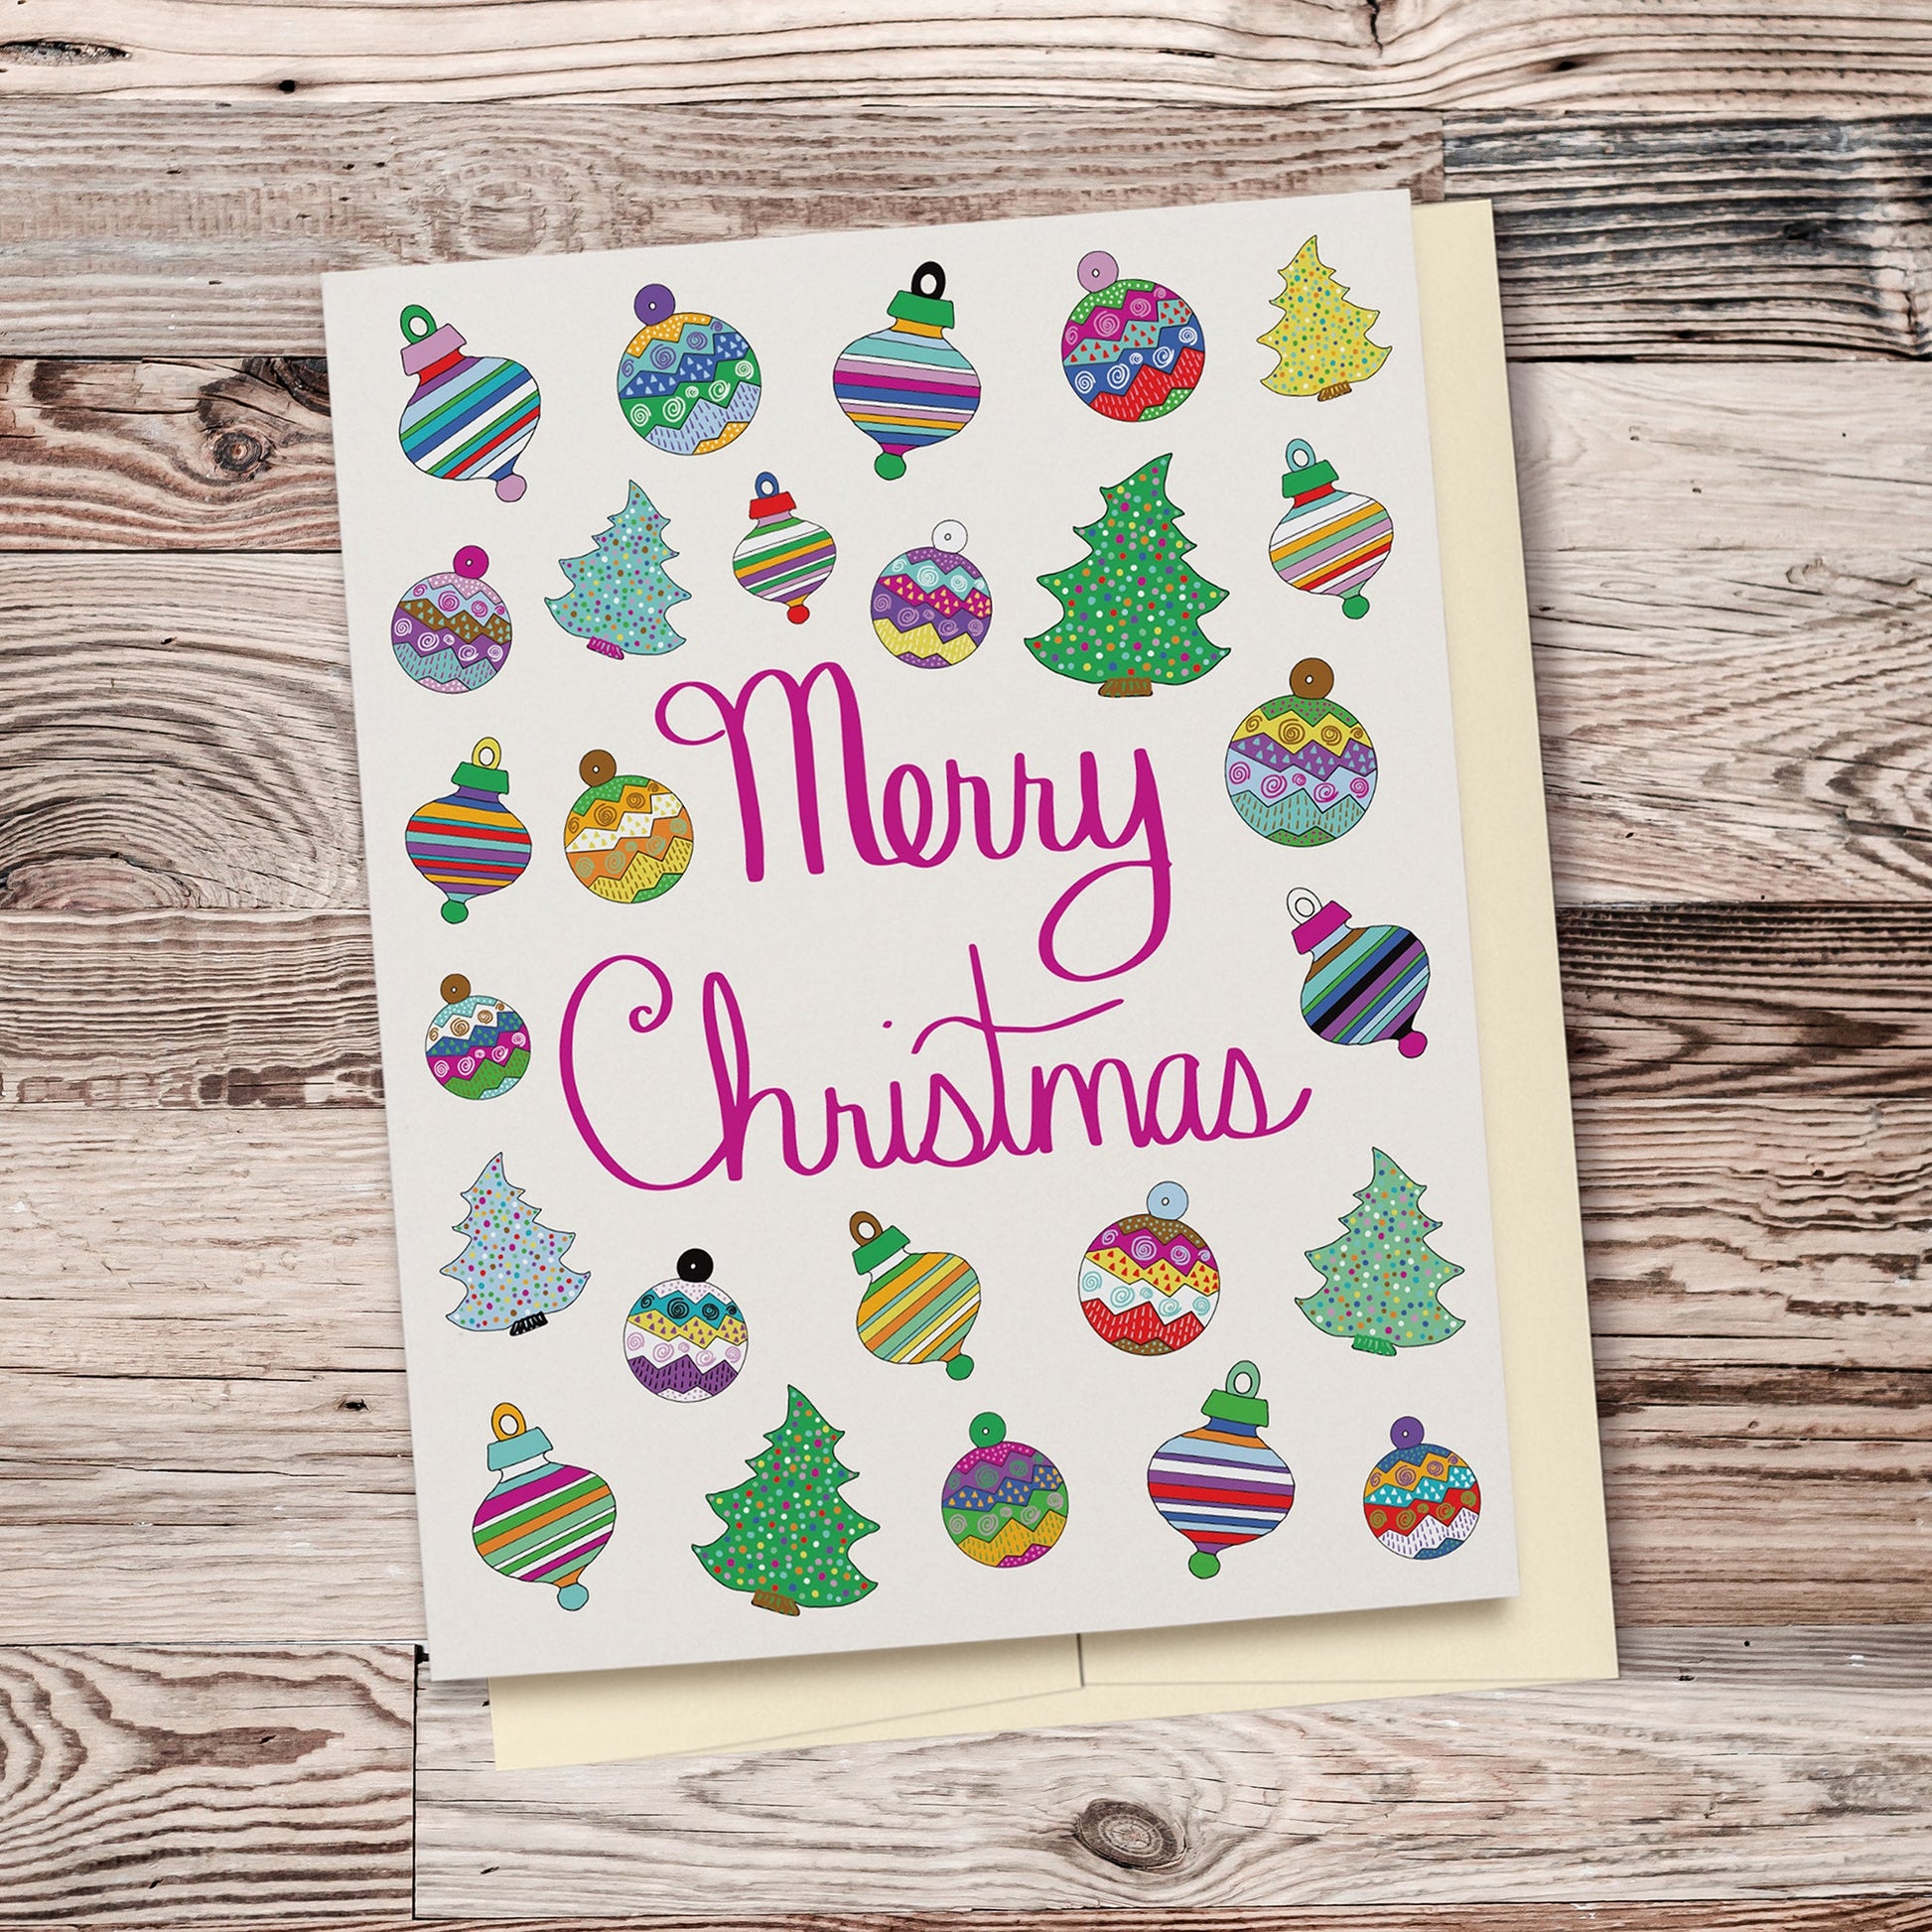 Fun & Festive Merry Christmas Card featuring hand drawn colorful ornaments & Christmas trees with fuchsia-colored hand lettered "Merry Christmas" script. Displayed on a wood background.